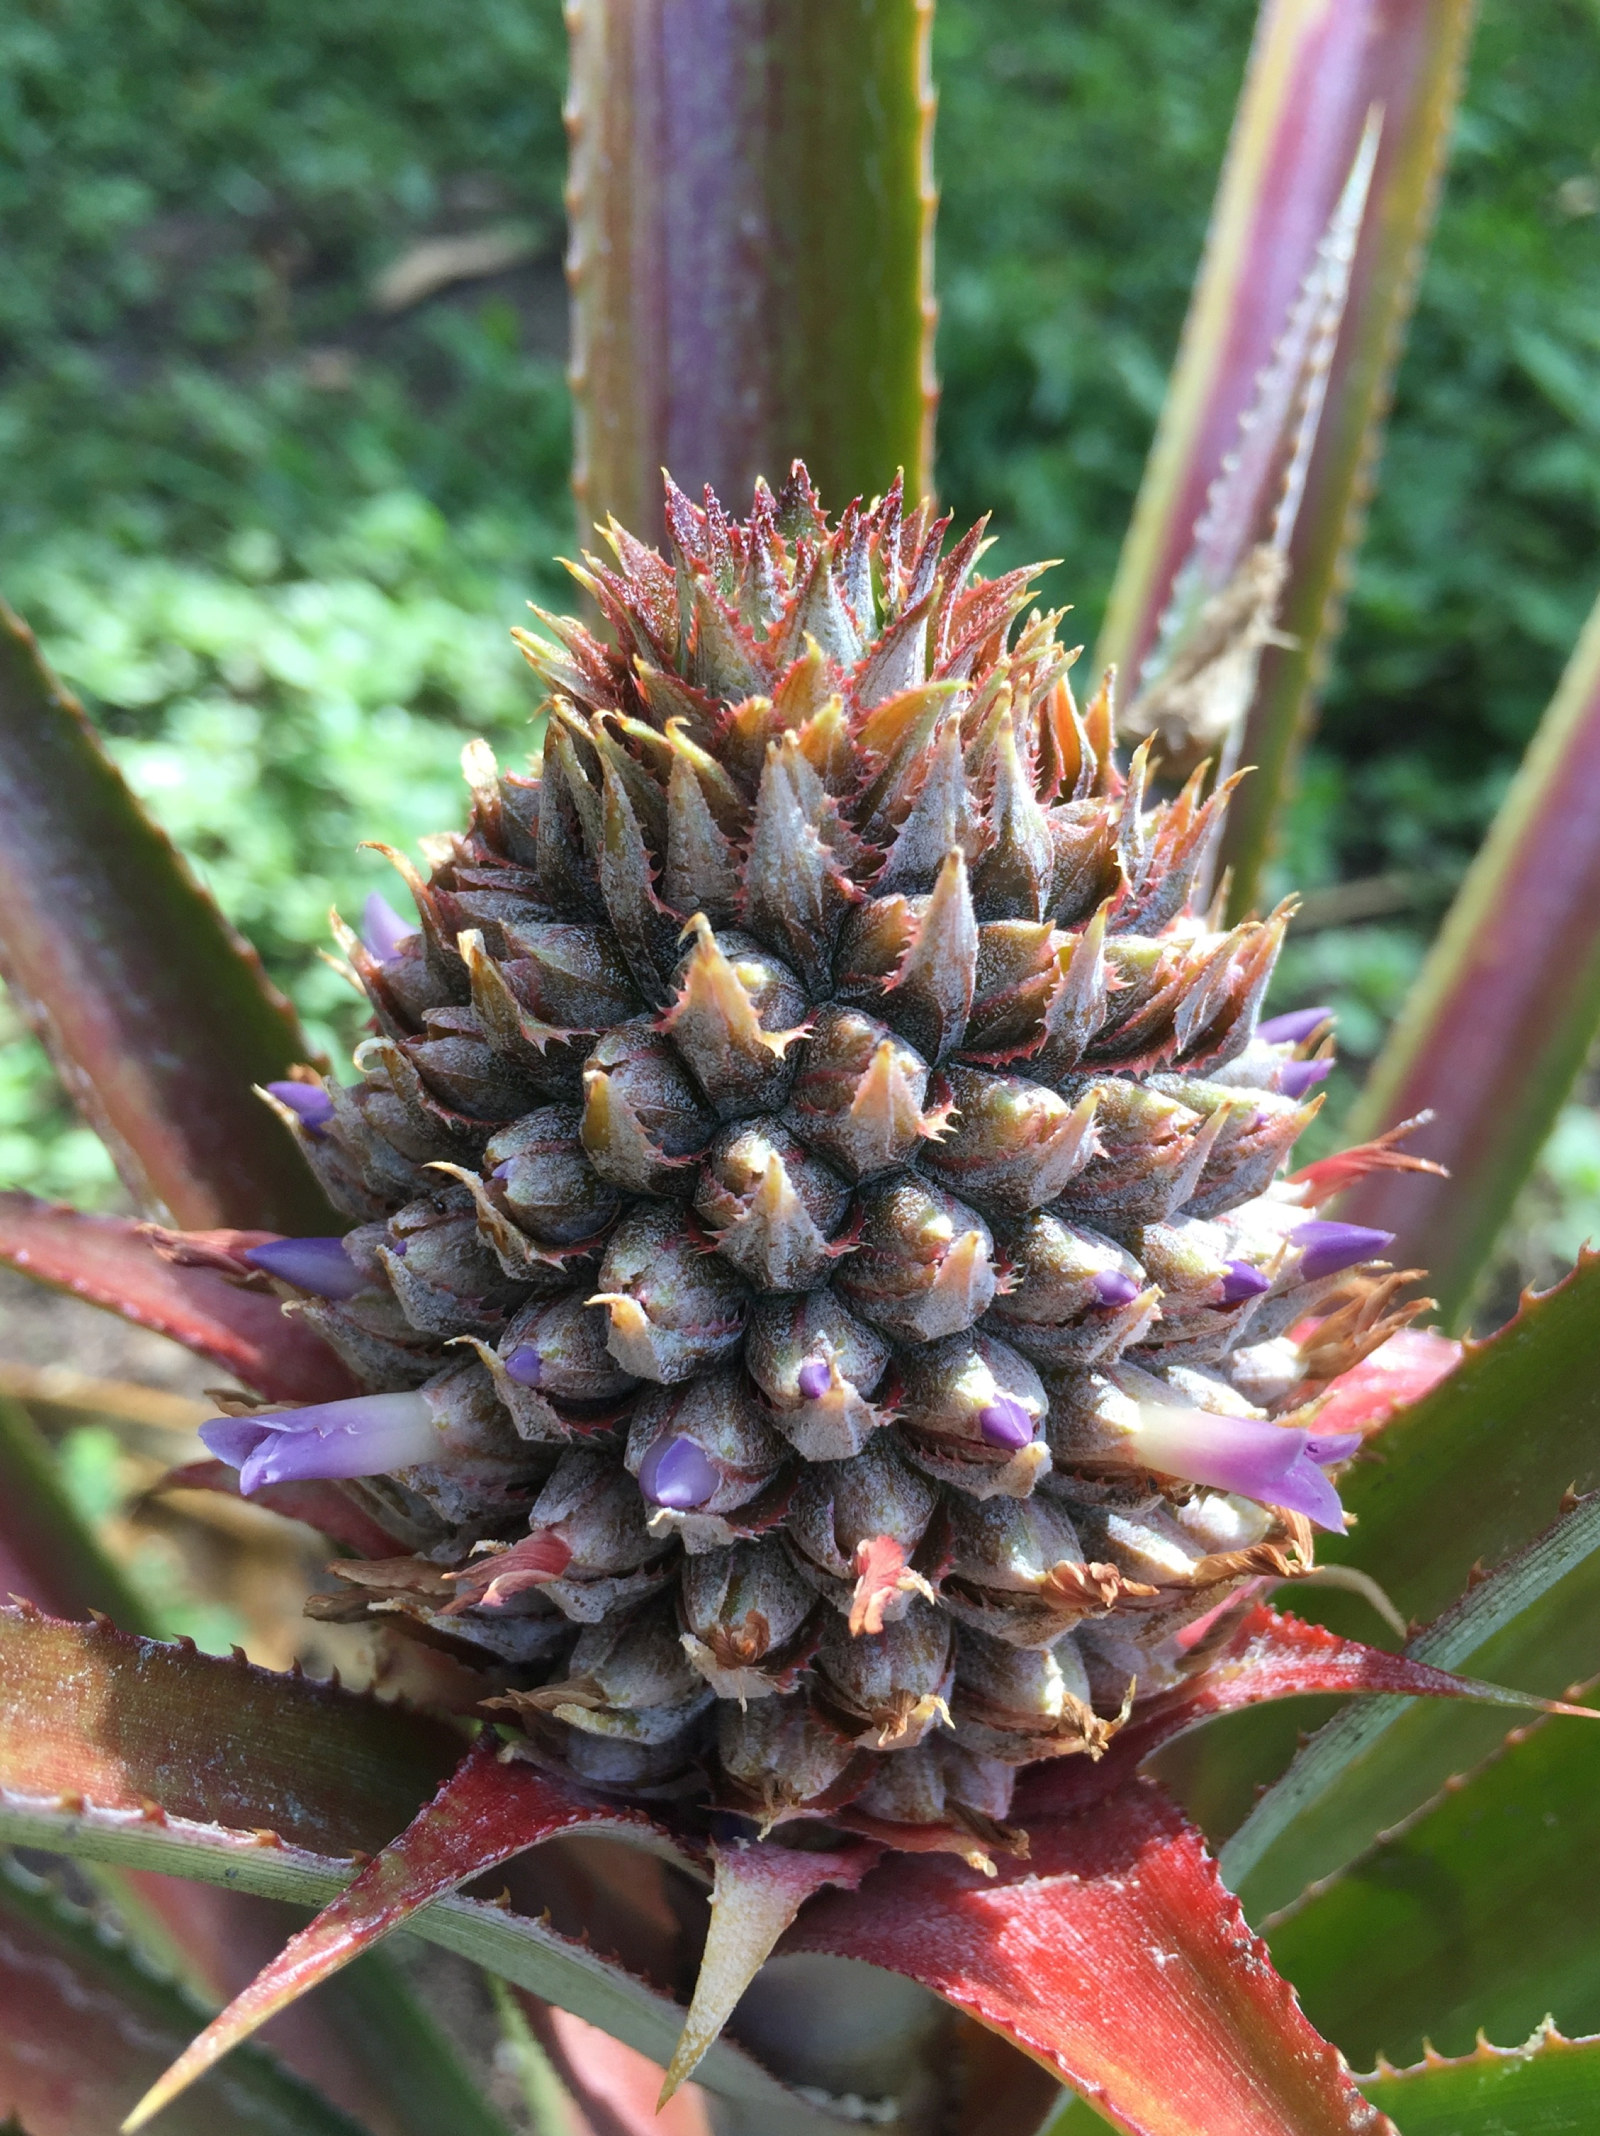 A close up image of the the Vaucluse House pineapple in flower